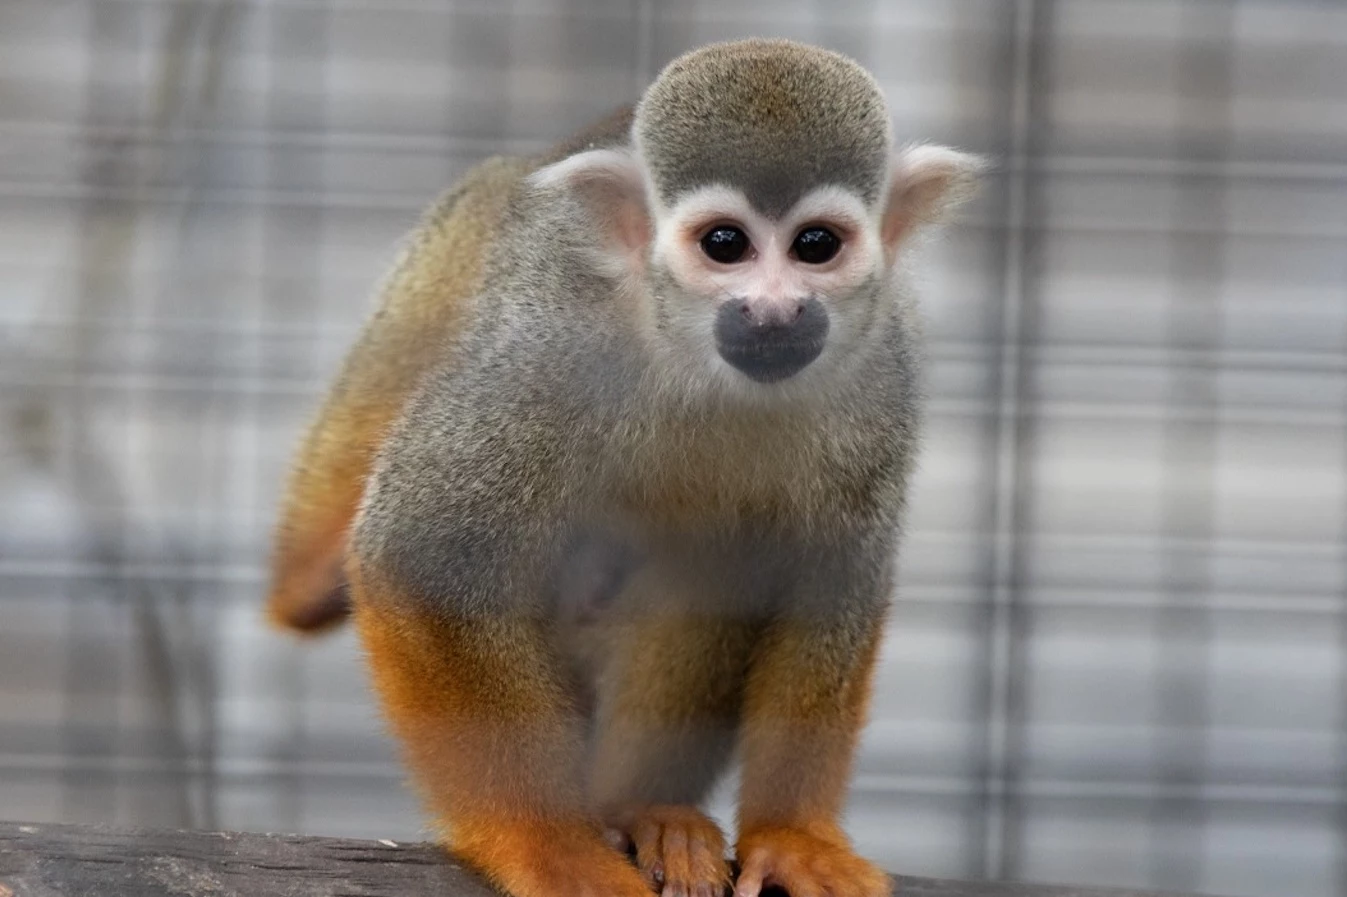 12 monkeys missing from Louisiana zoo as search for thief